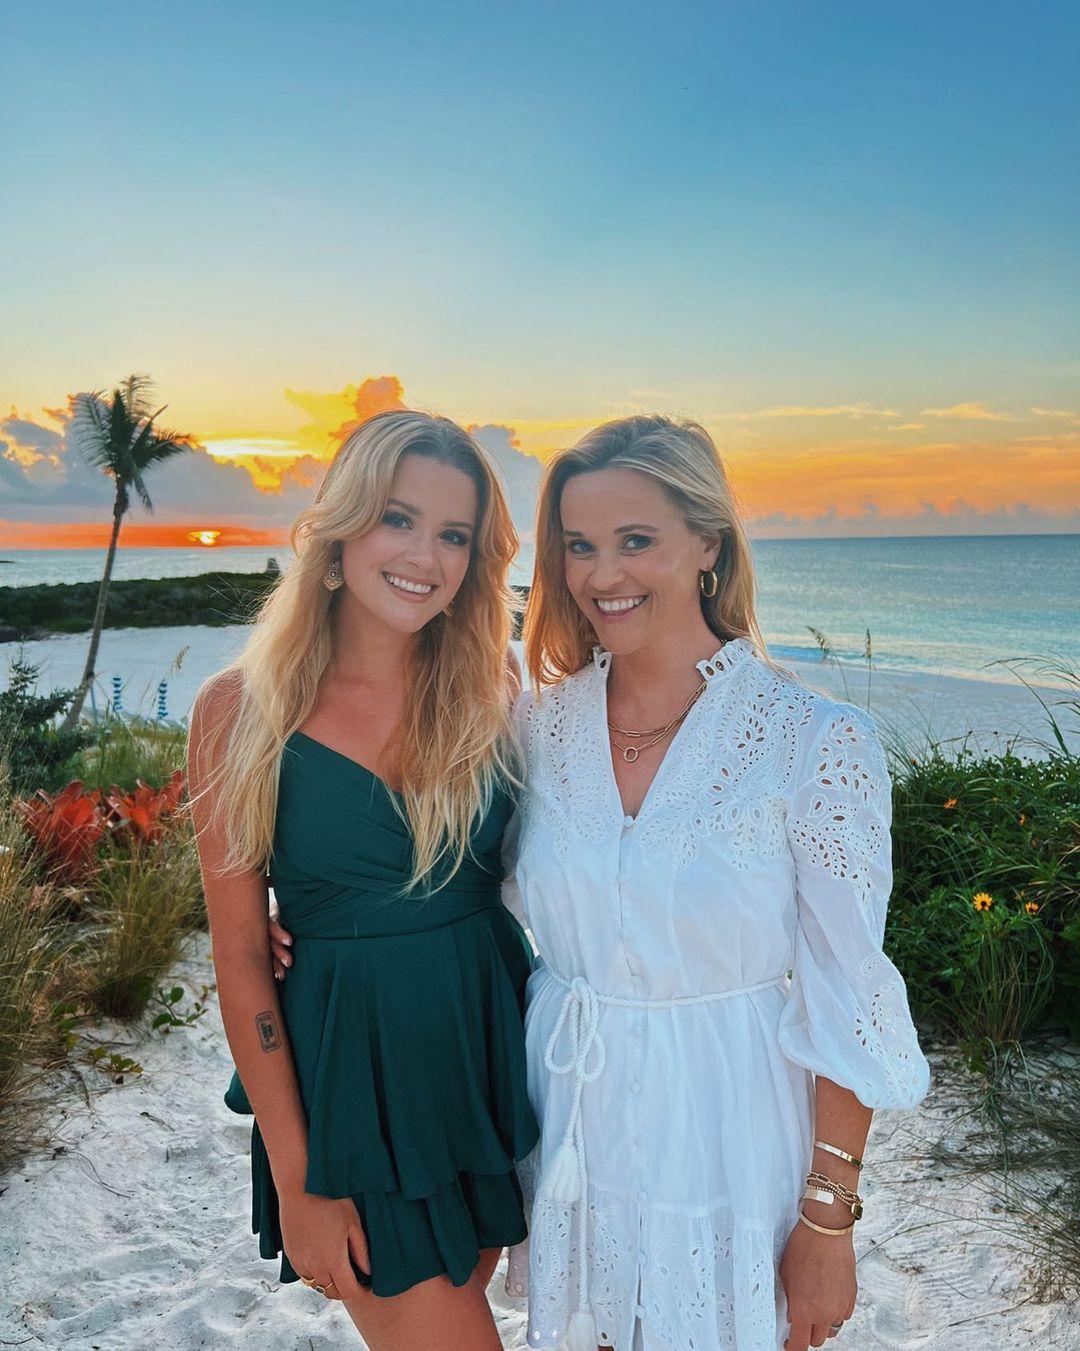 Reese Witherspoon and daughter Ava